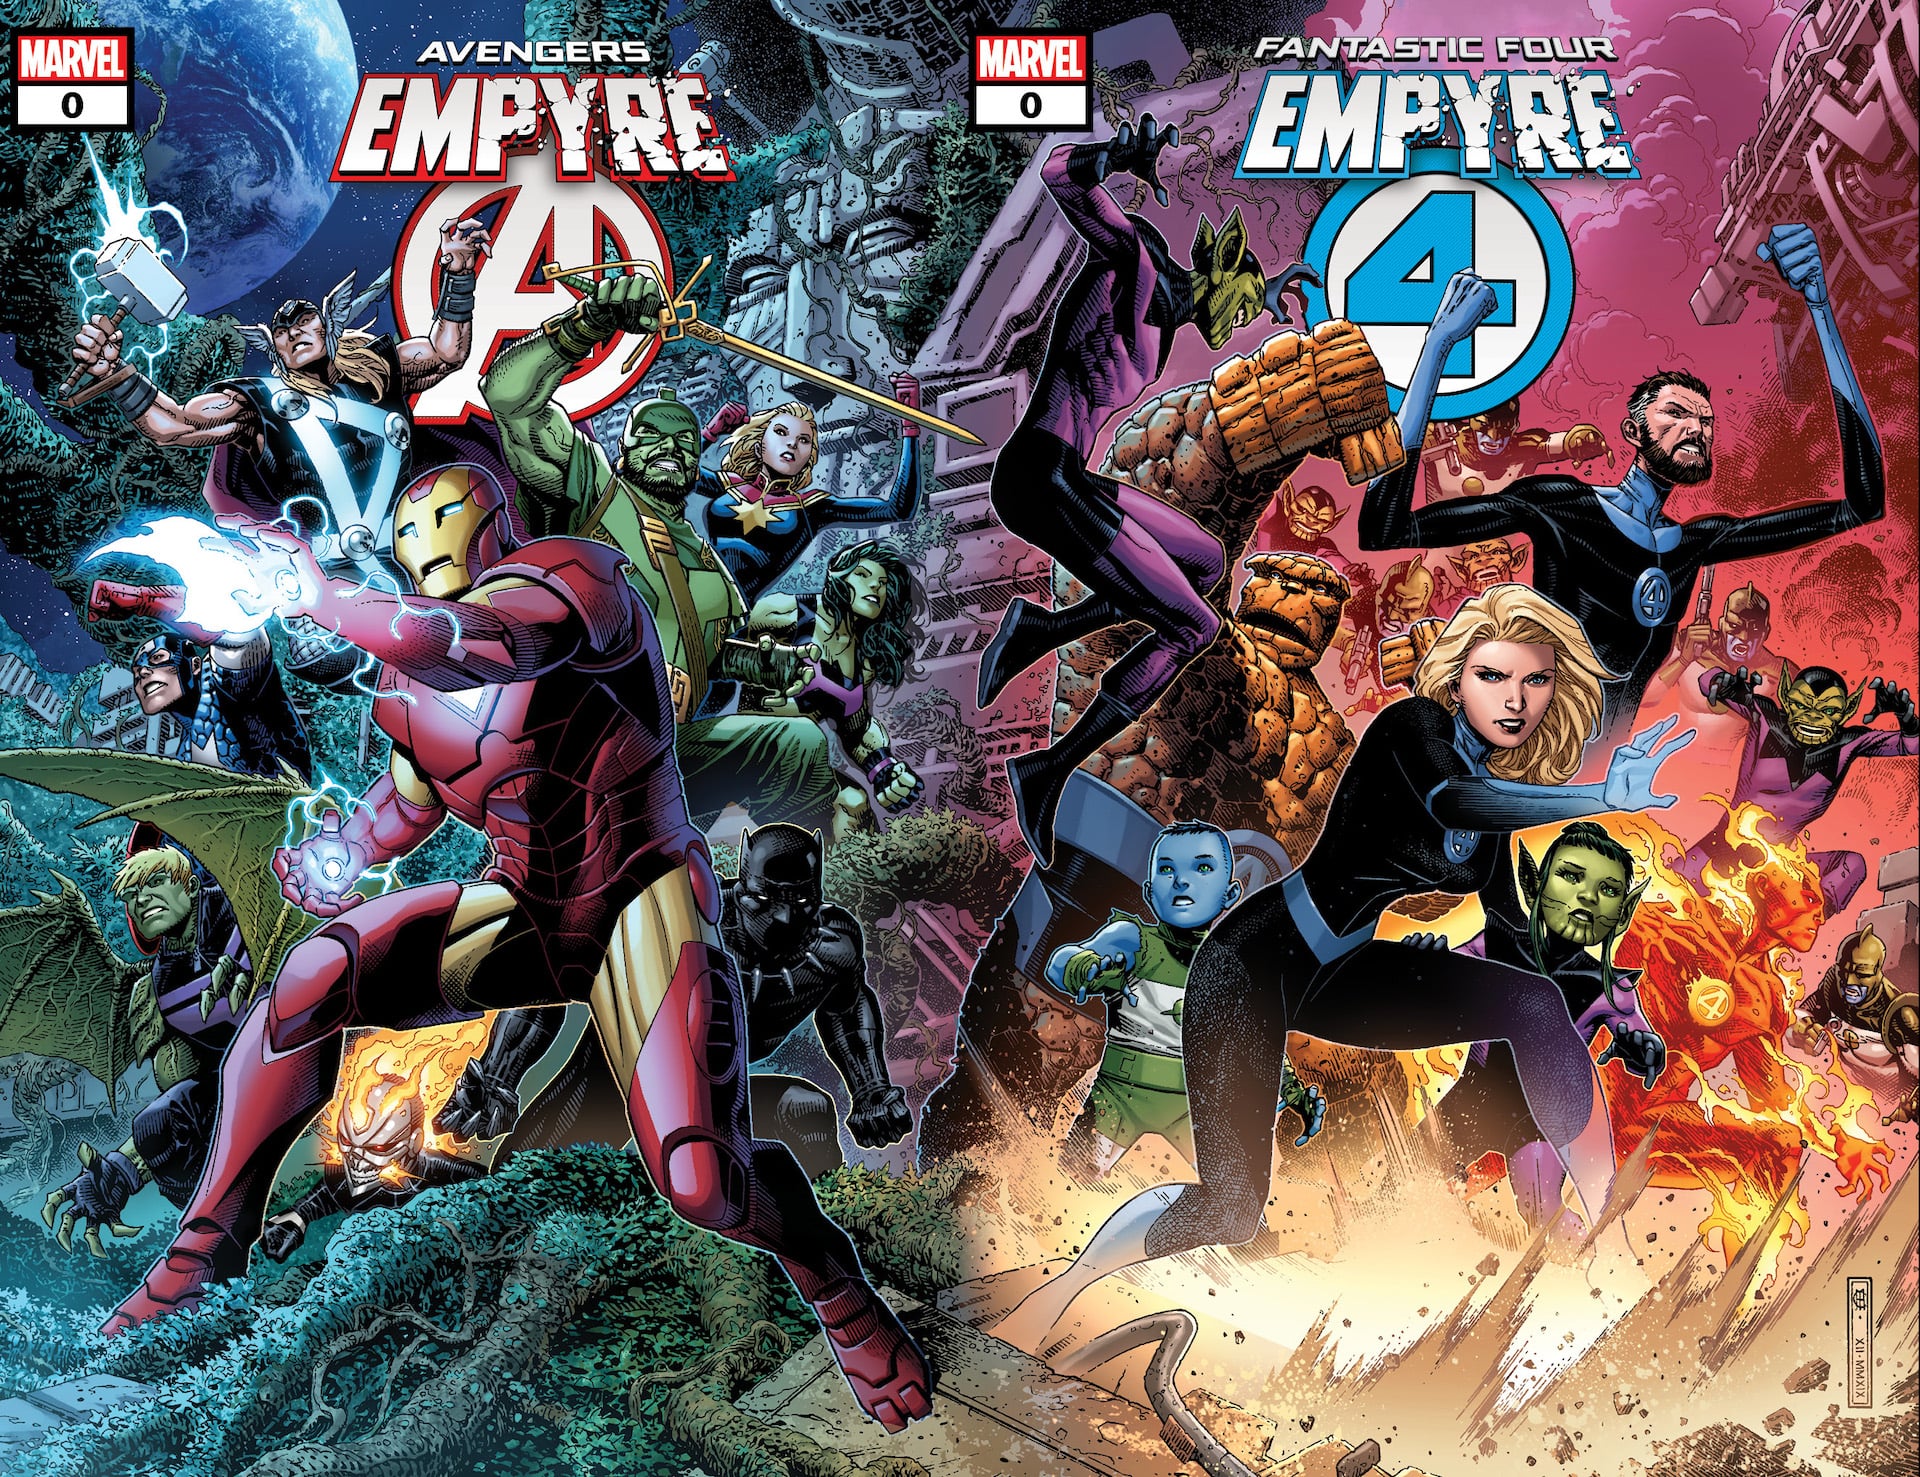 Upcoming Marvel Comics event 'Empyre' gets two new #0 issue reveals